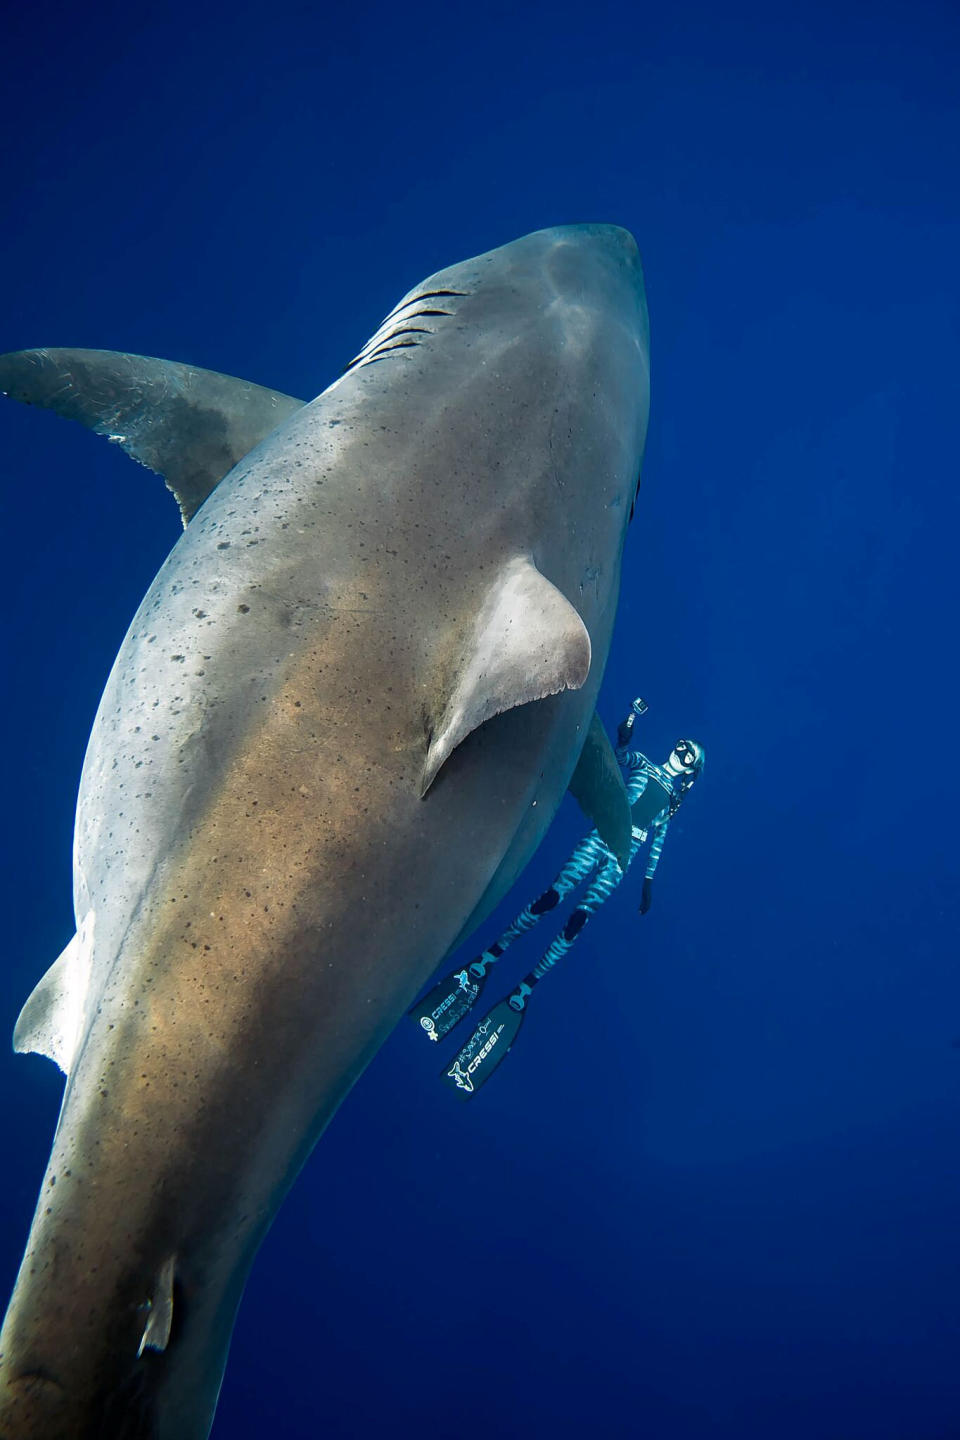 <em>It is thought to be ‘Deep Blue’, one of the largest recorded sharks (Picture: @JuanSharks/@OceanRamsey/Juan Oliphant/oneoceandiving.com via REUTERS)</em>